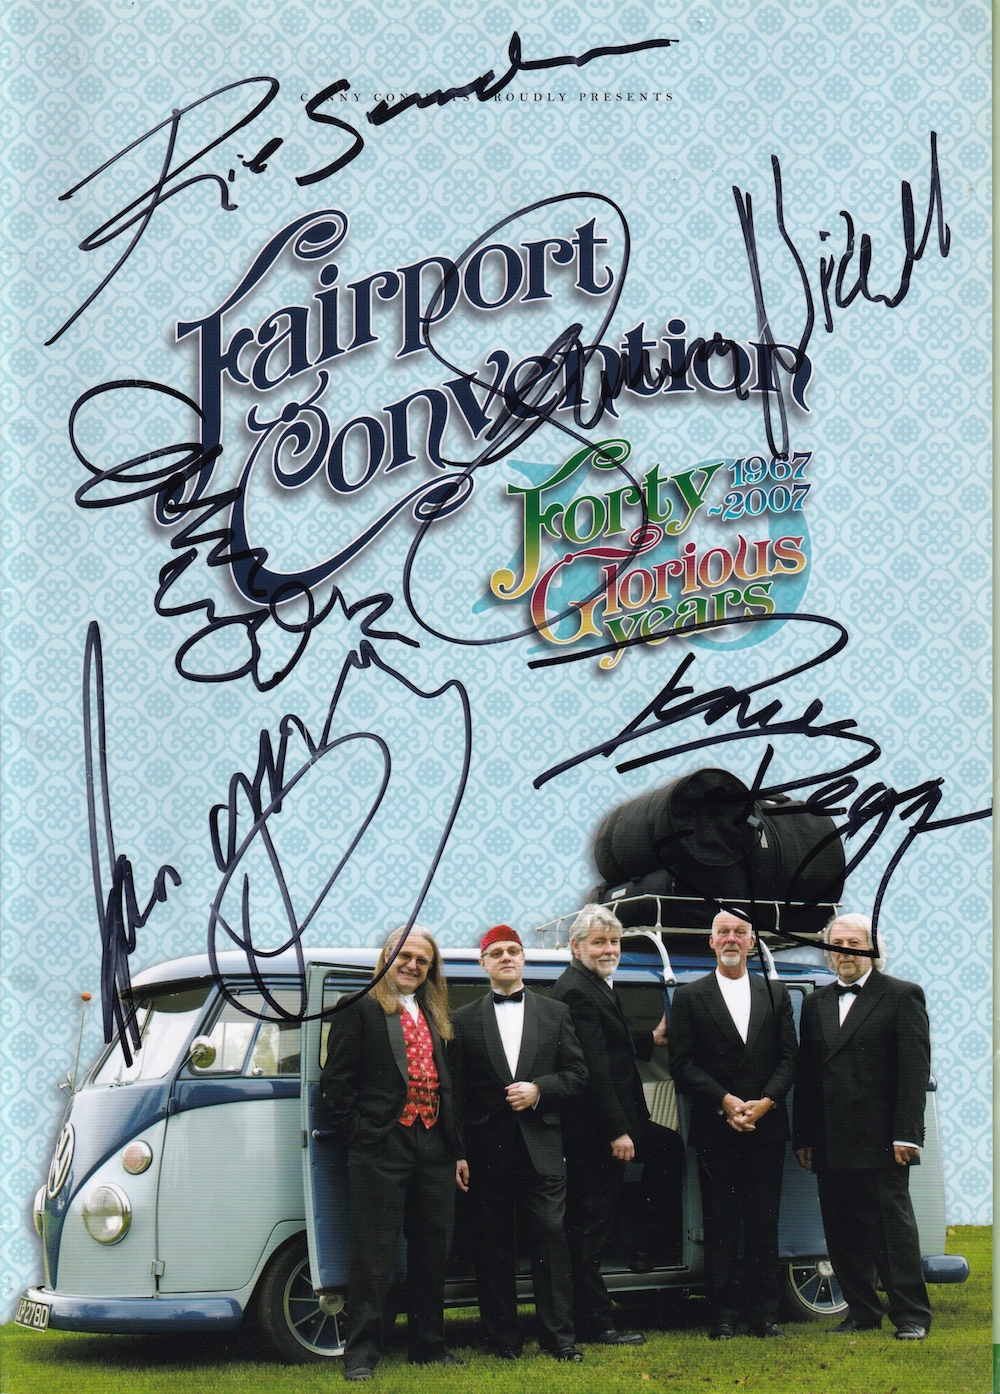 Fairport Convention, Chart Topping 1960's Band Signed 2007 Concert Programme. Good condition. All